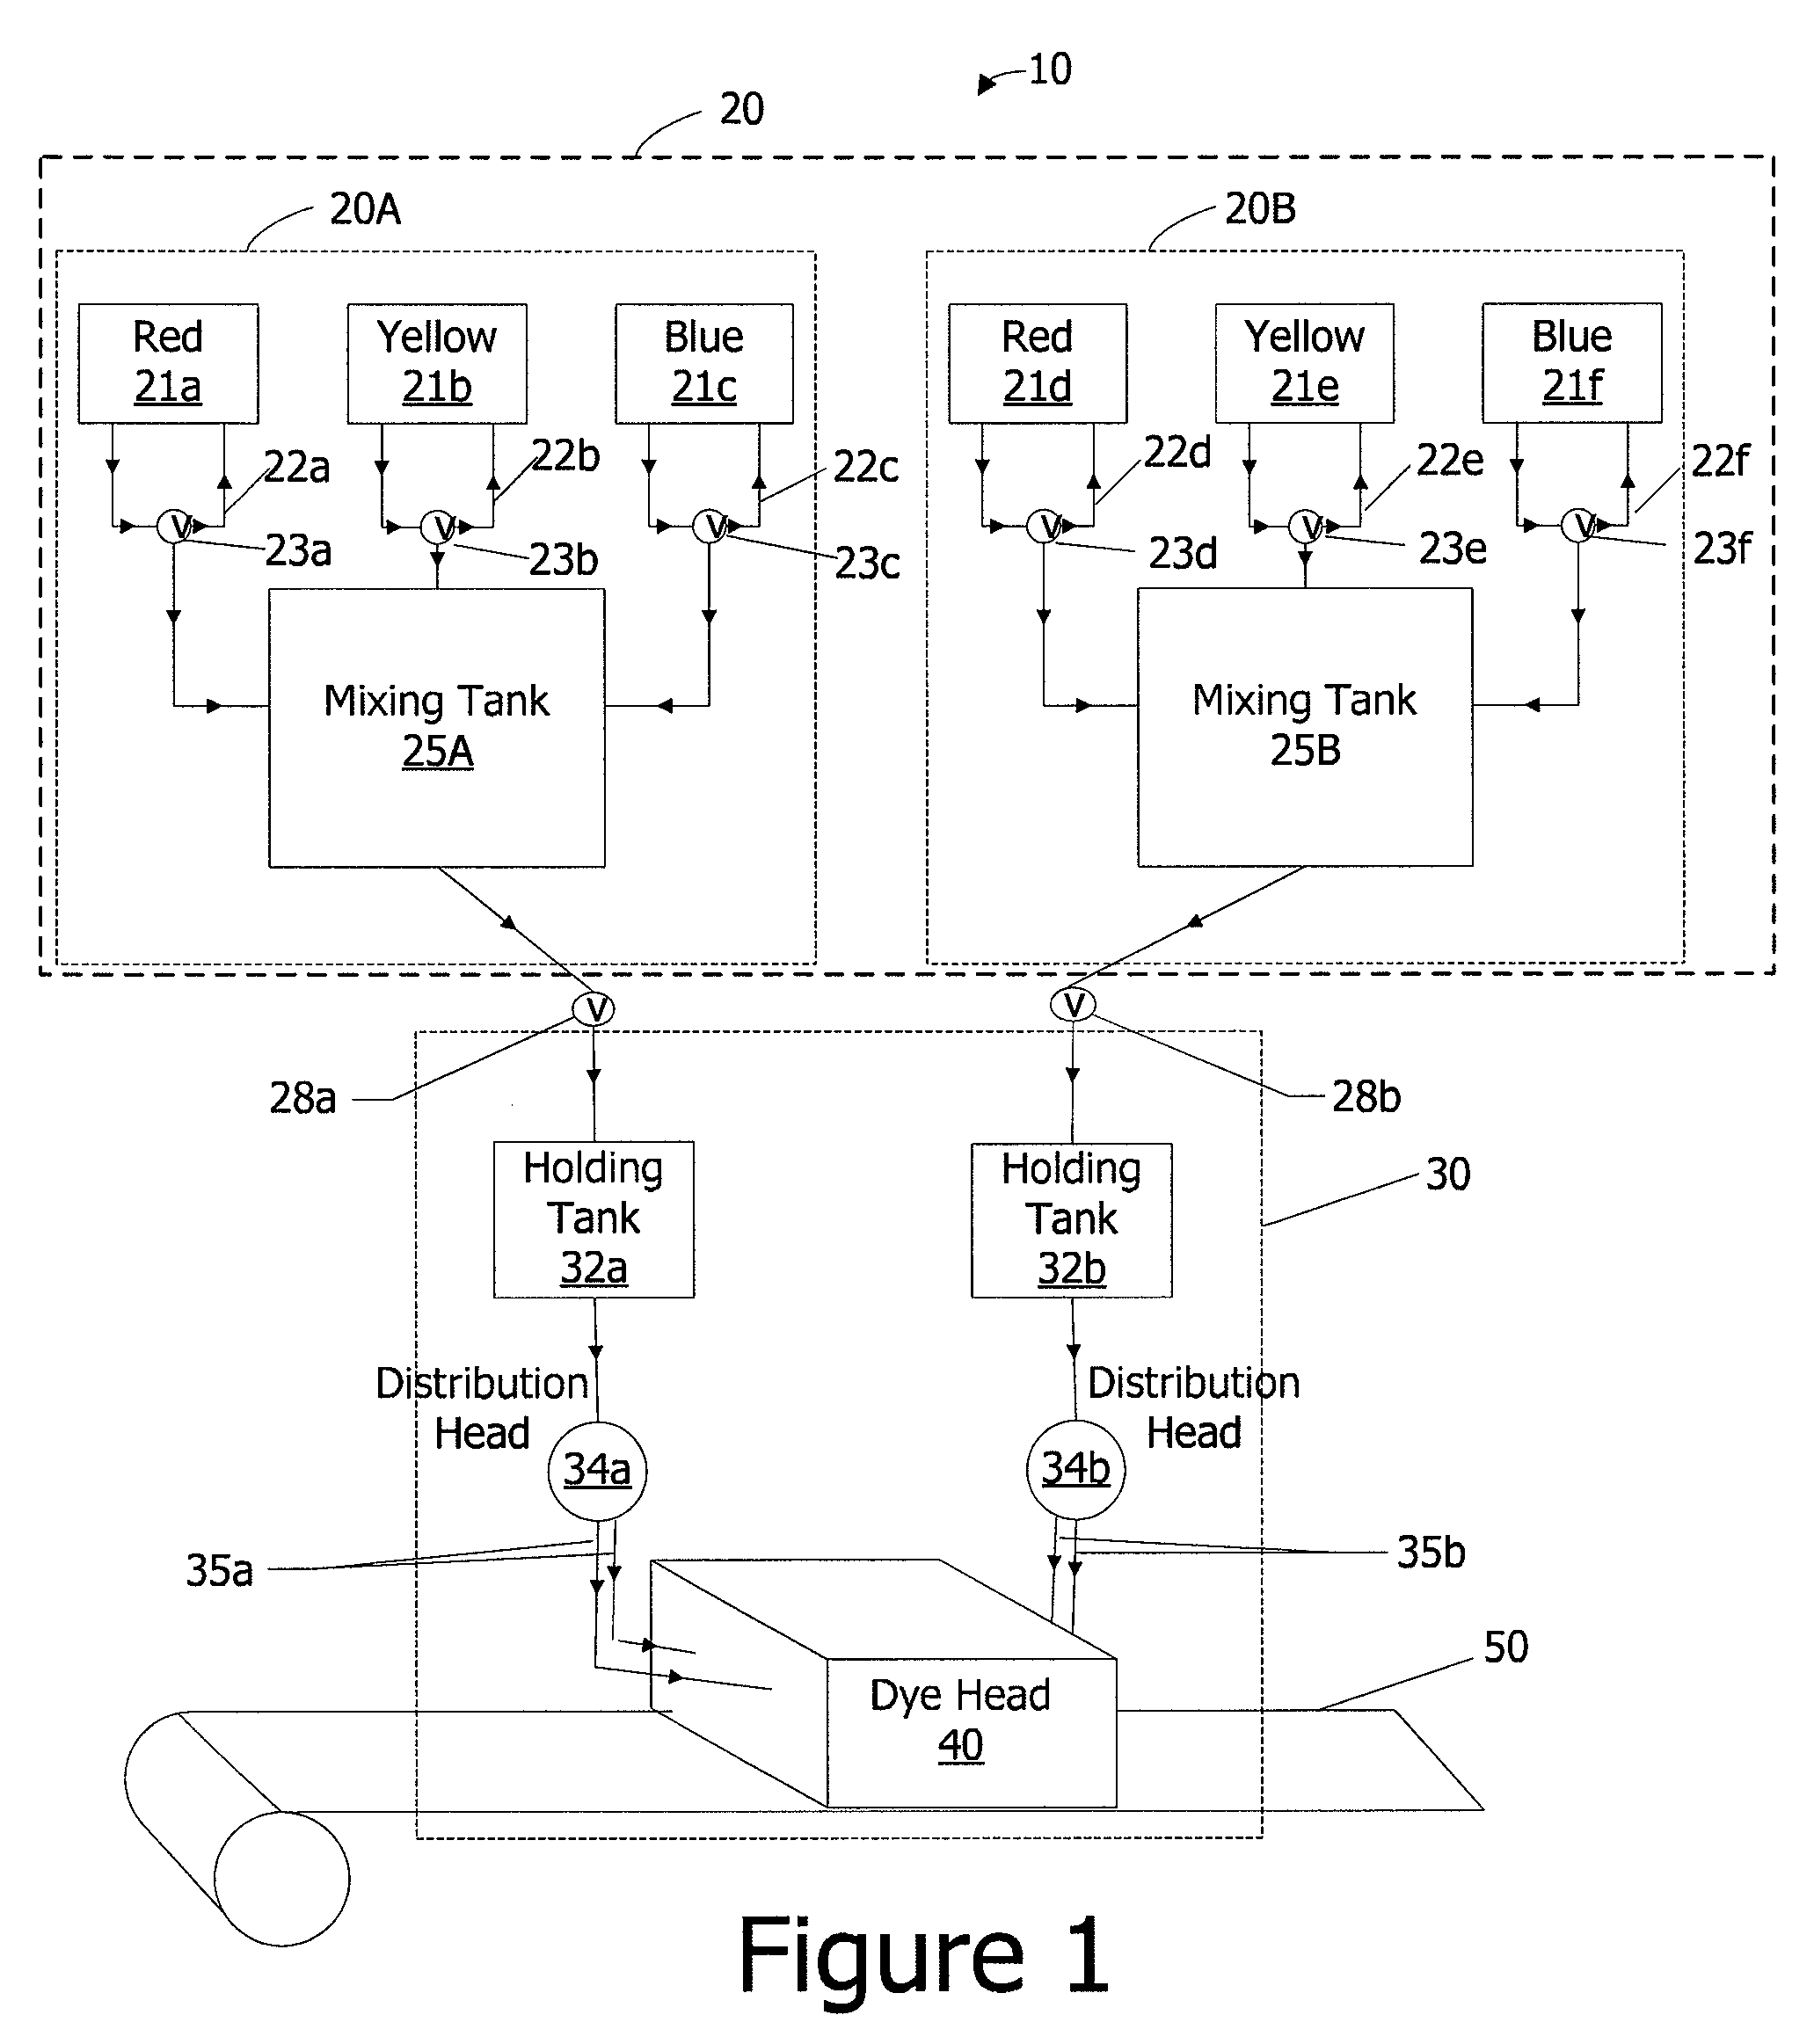 Carpet dyeing systems and methods